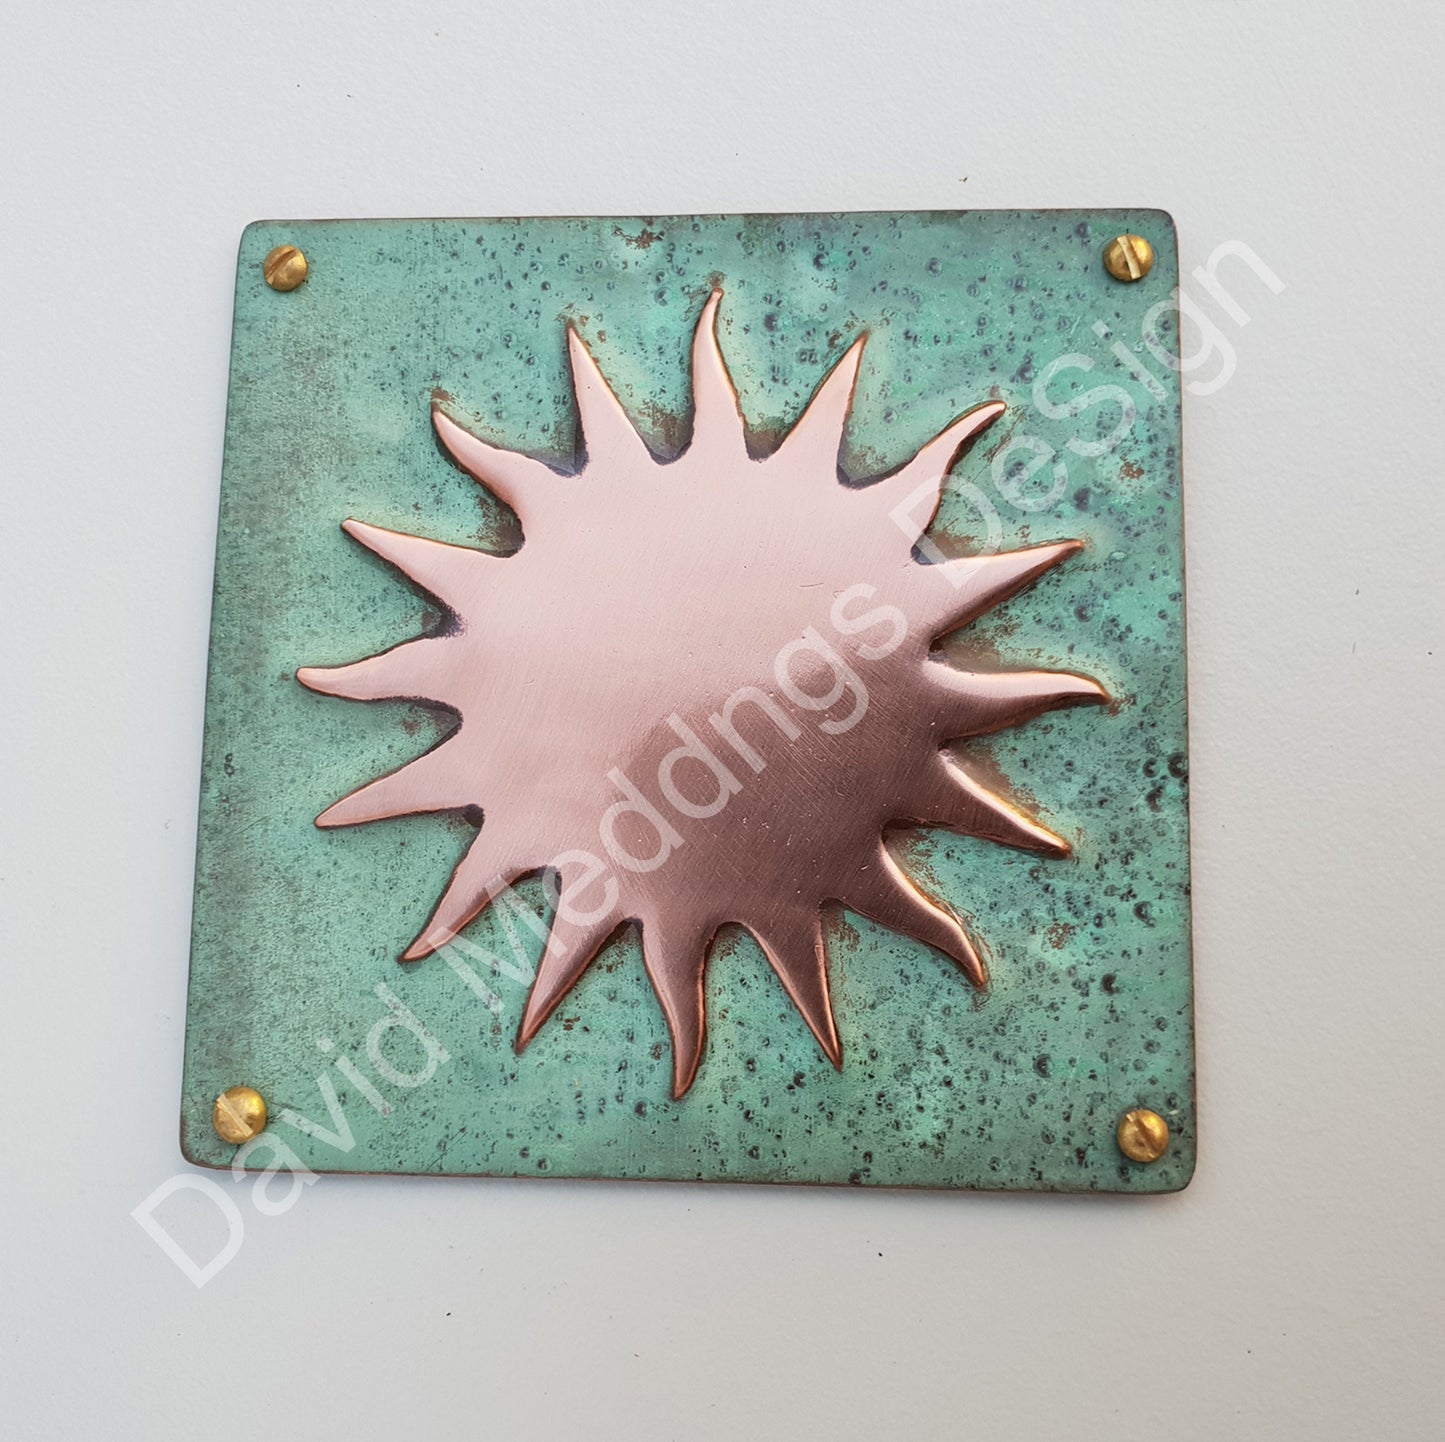 Sun star solar astronomy copper plaque in hammered or green copper 3.25"/82mm square indoor or out tx